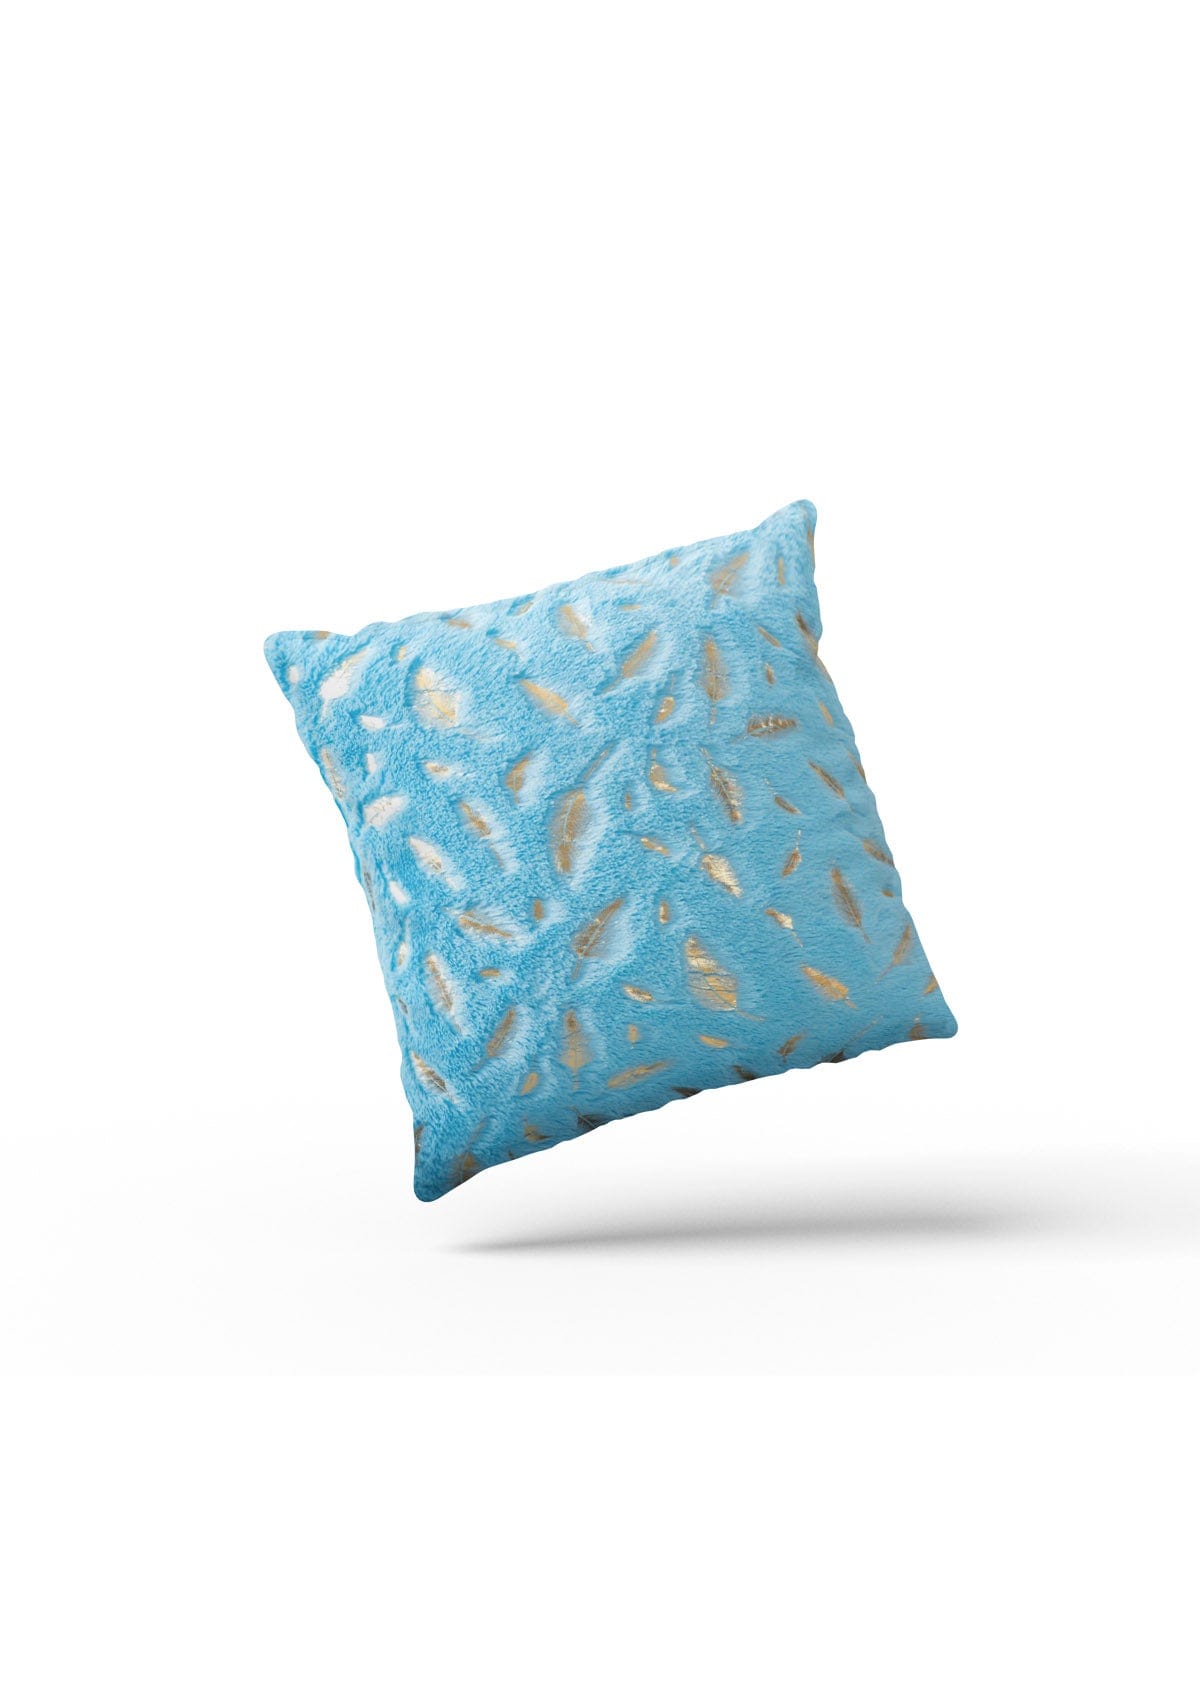 Blue and Gold UK Cushion Covers | Royal Azure | CovermyCushion